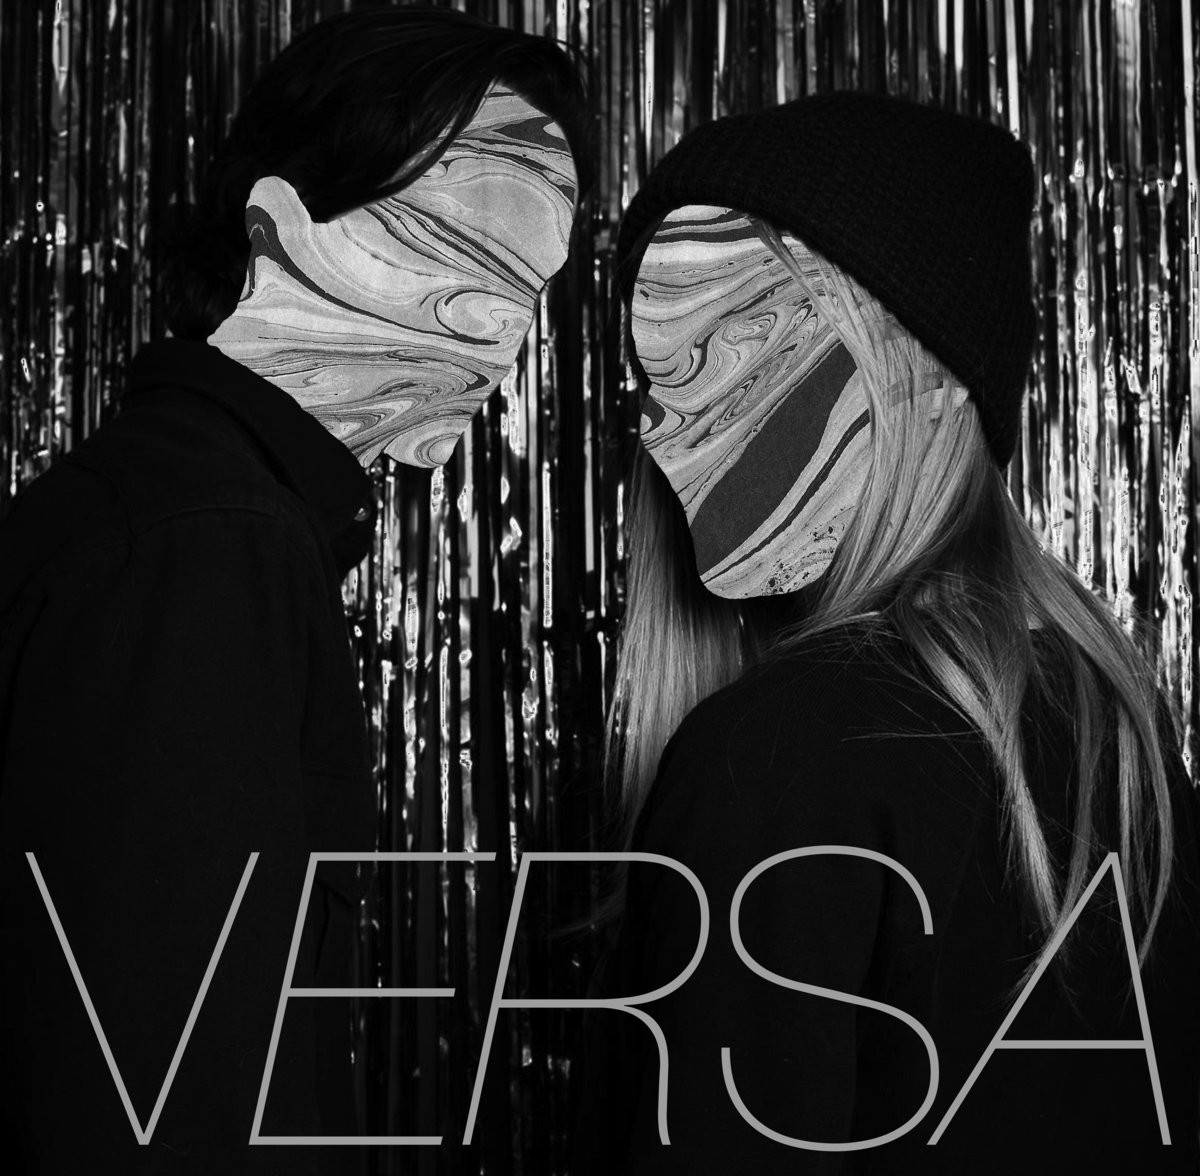 Our interview with Versa: Versa get visually inspired. Beth Andralojc recently spoke with the duo